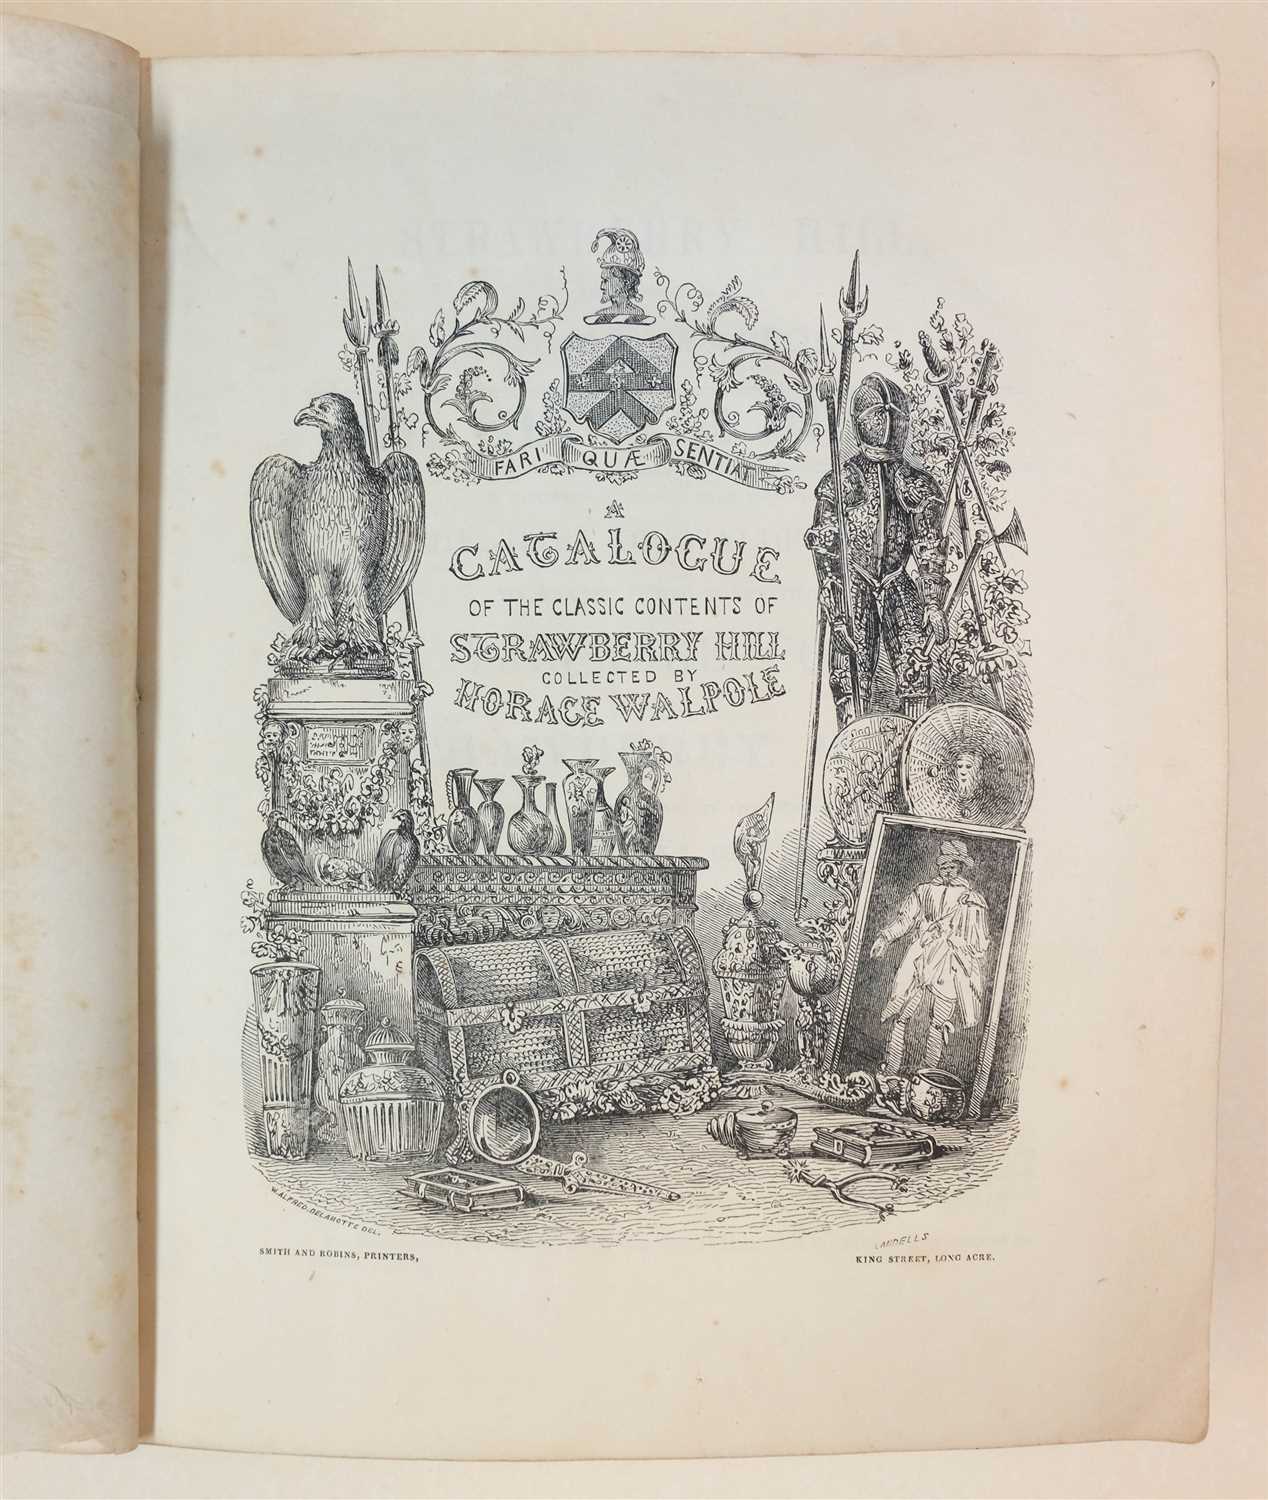 Lot 89 - Auction catalogue. Catalogue of the Contents of Strawberry Hill, 1842